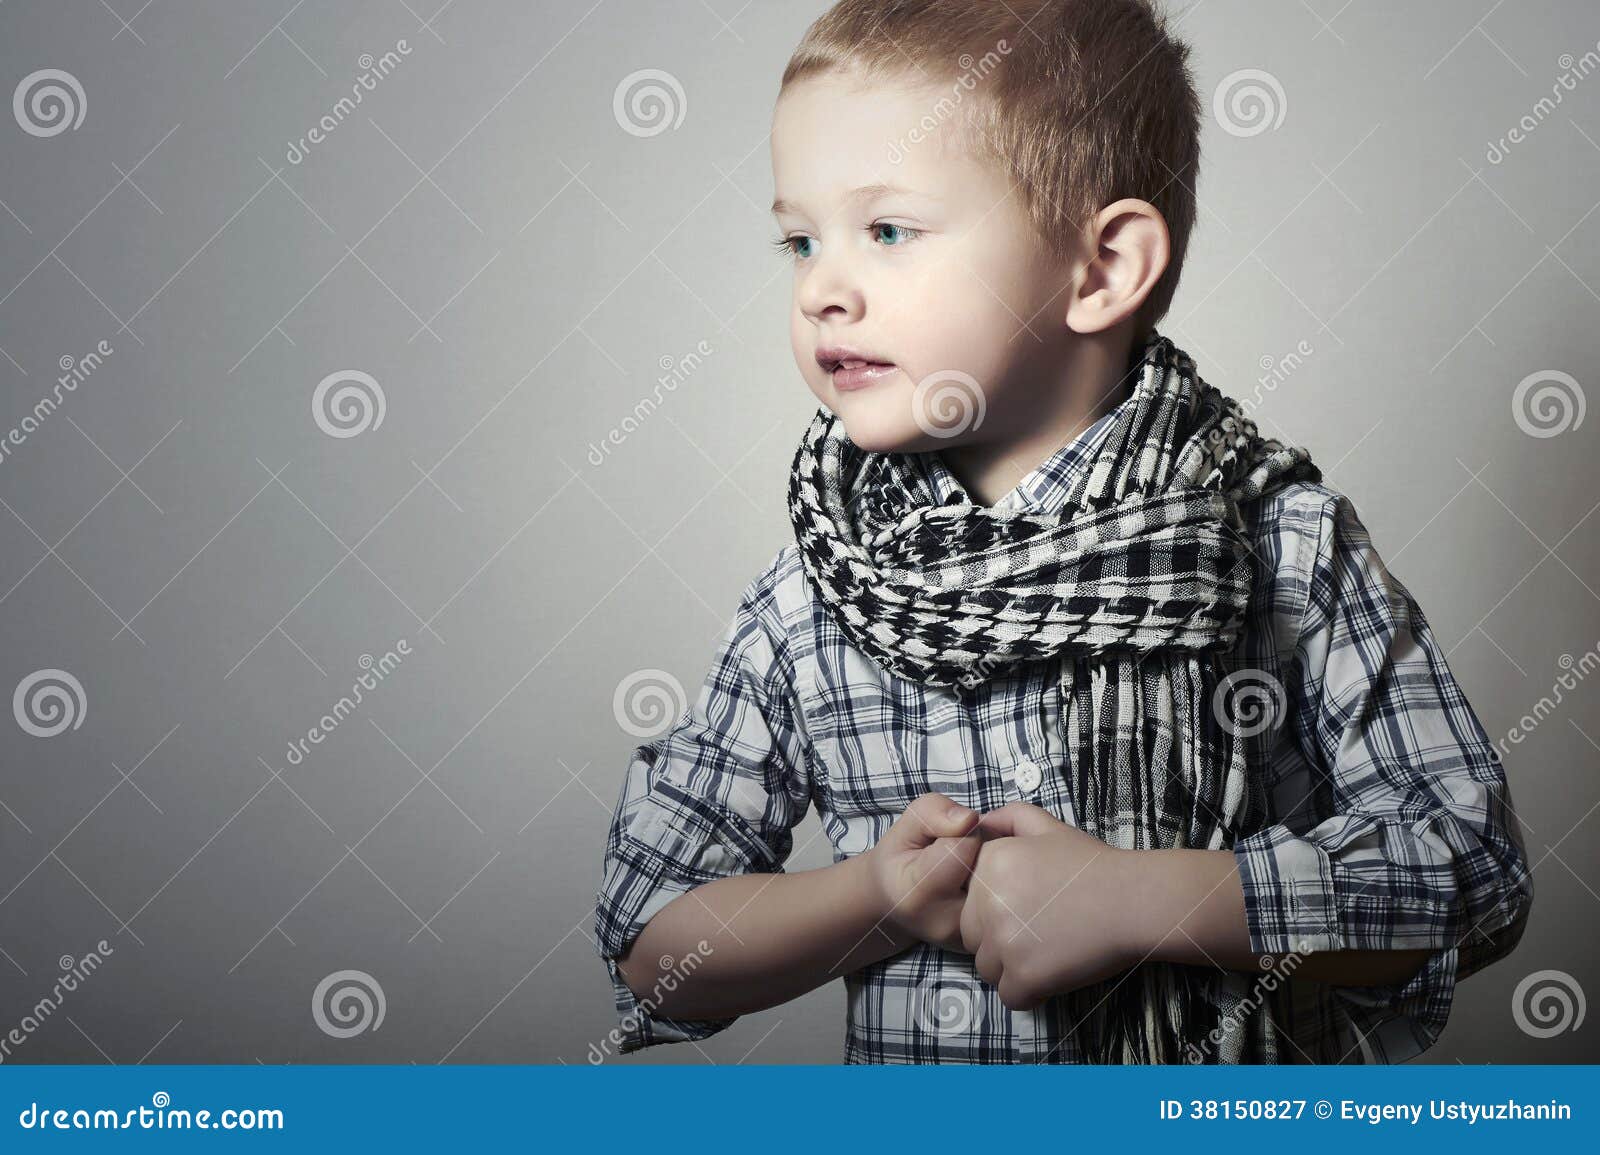 child. funny little boy in scurf. fashion children. 4 years old. plaid shirt